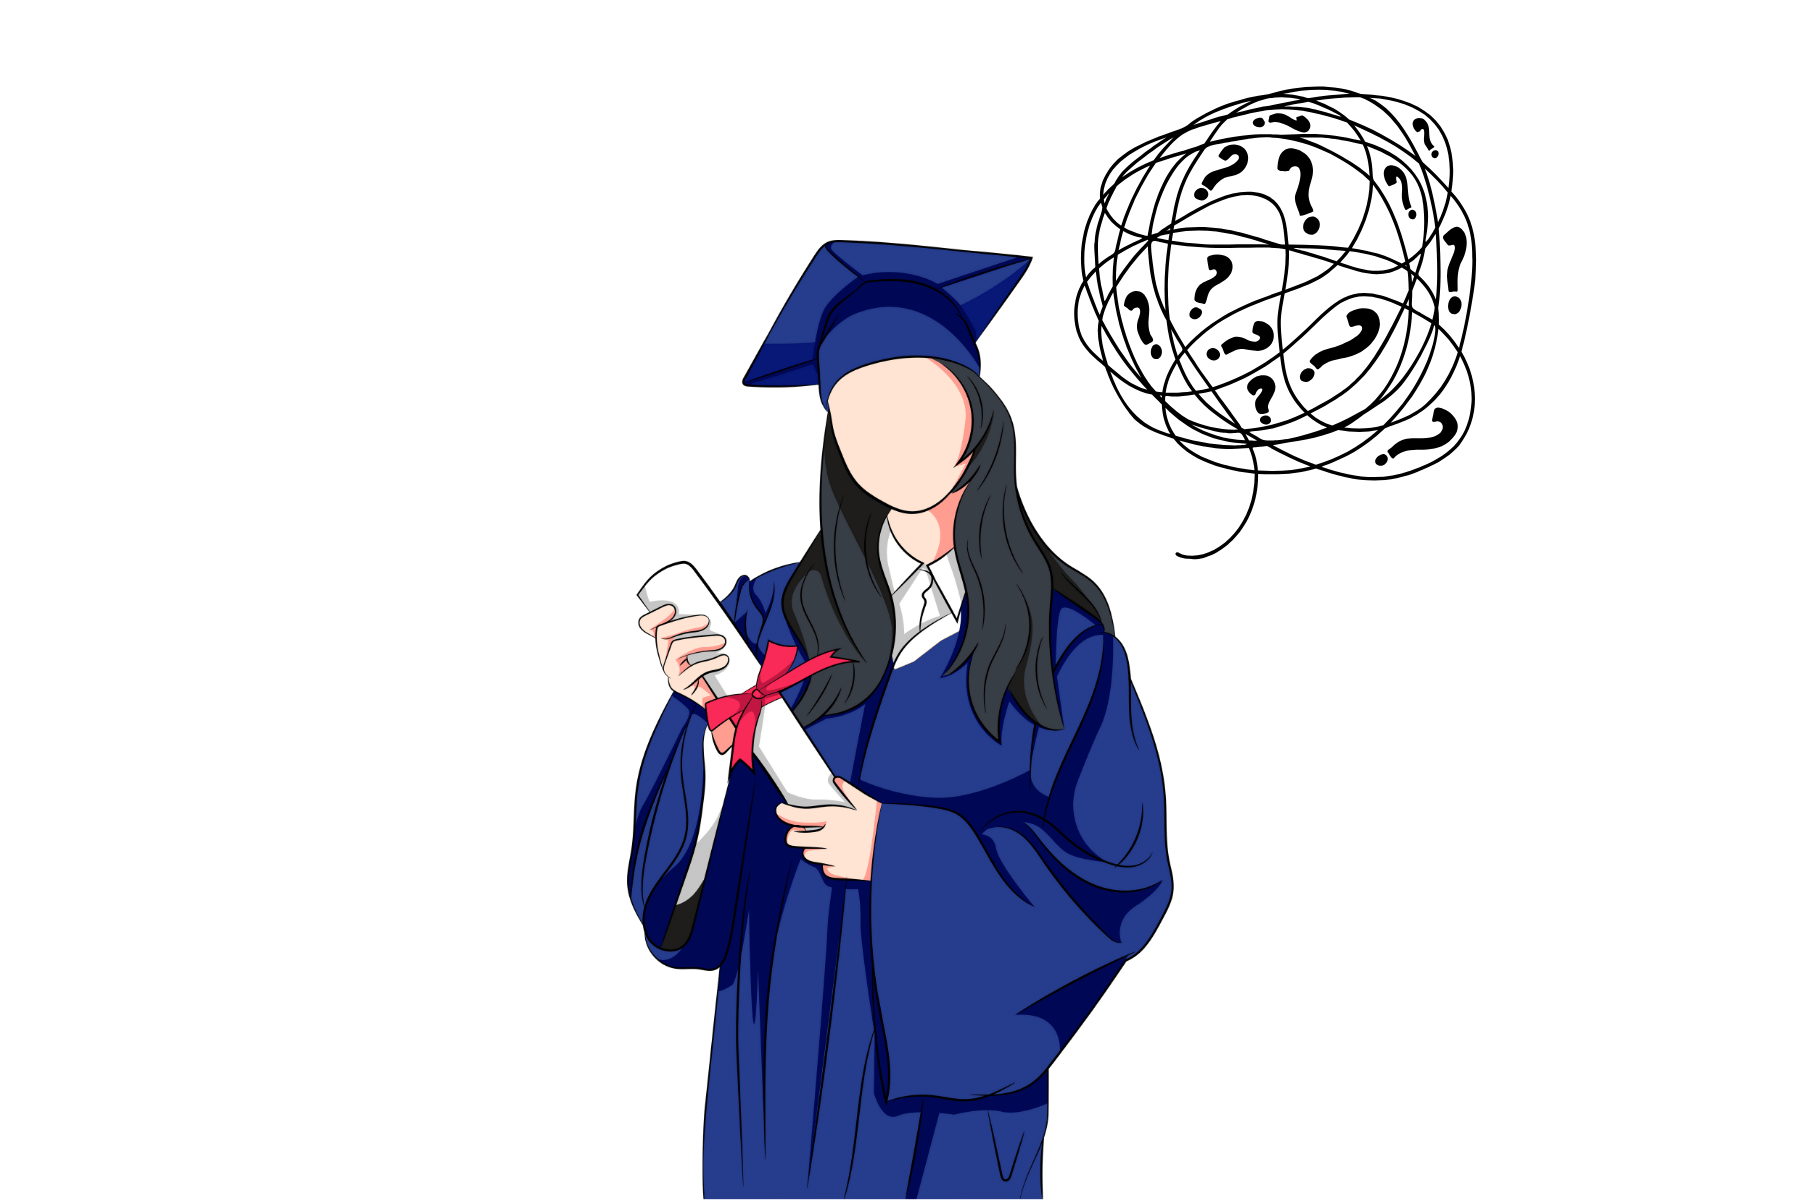 drawn image of a faceless student in a cap and gown with a bubble thought with question marks inside